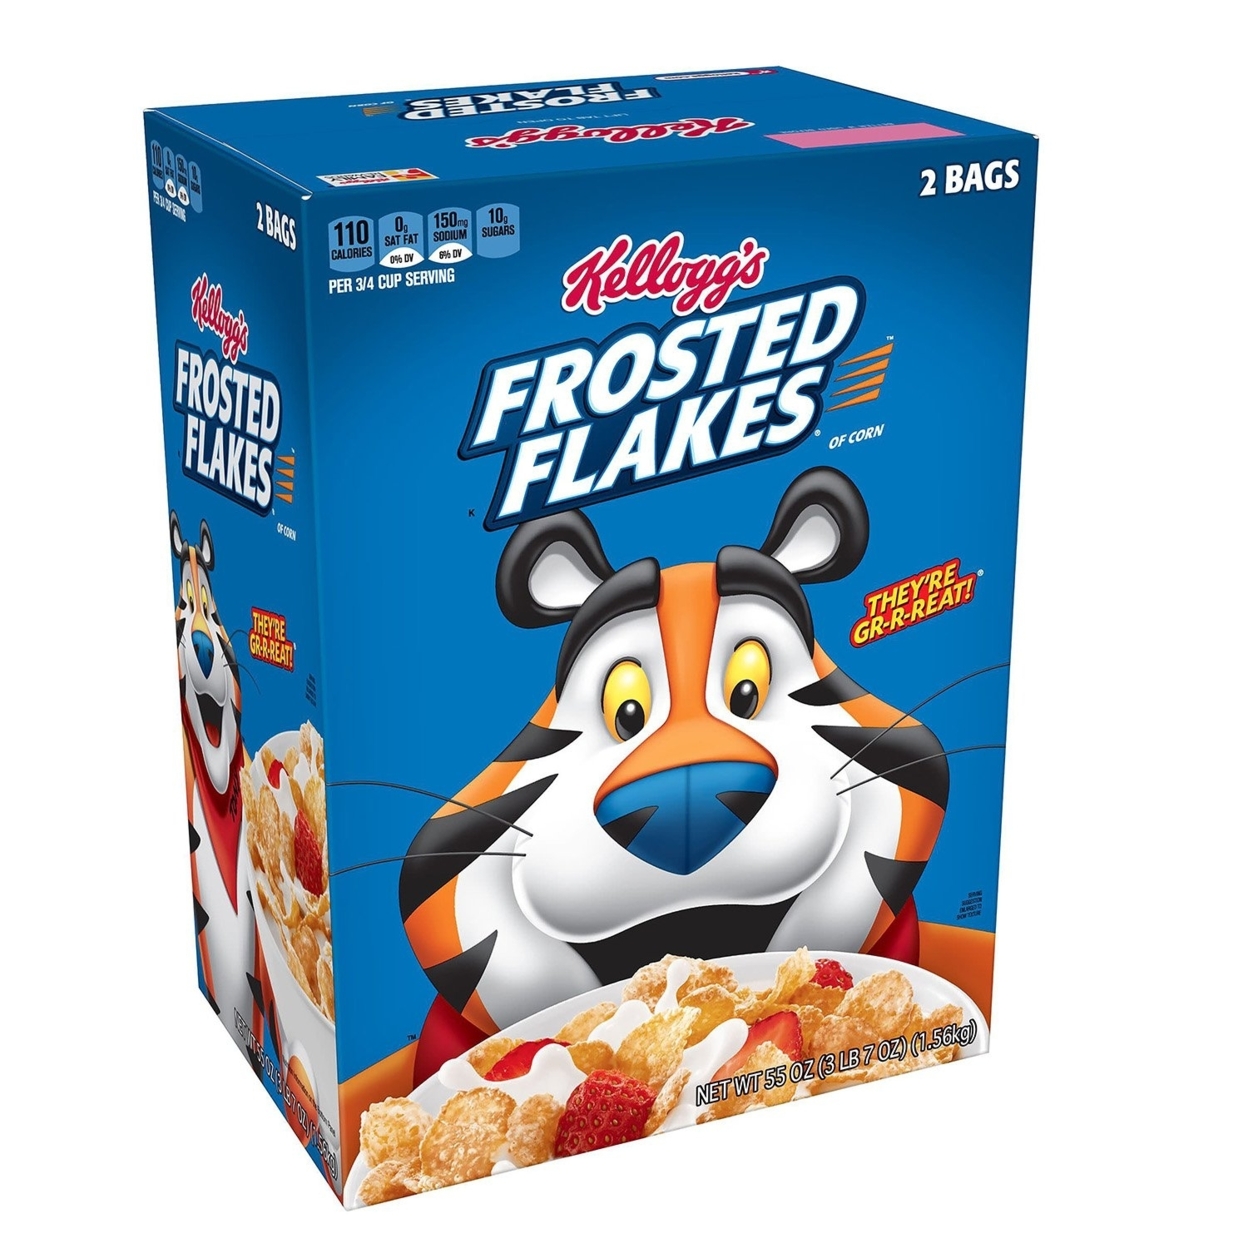 Kellogg's Frosted Flakes Cereal (55 Ounce)